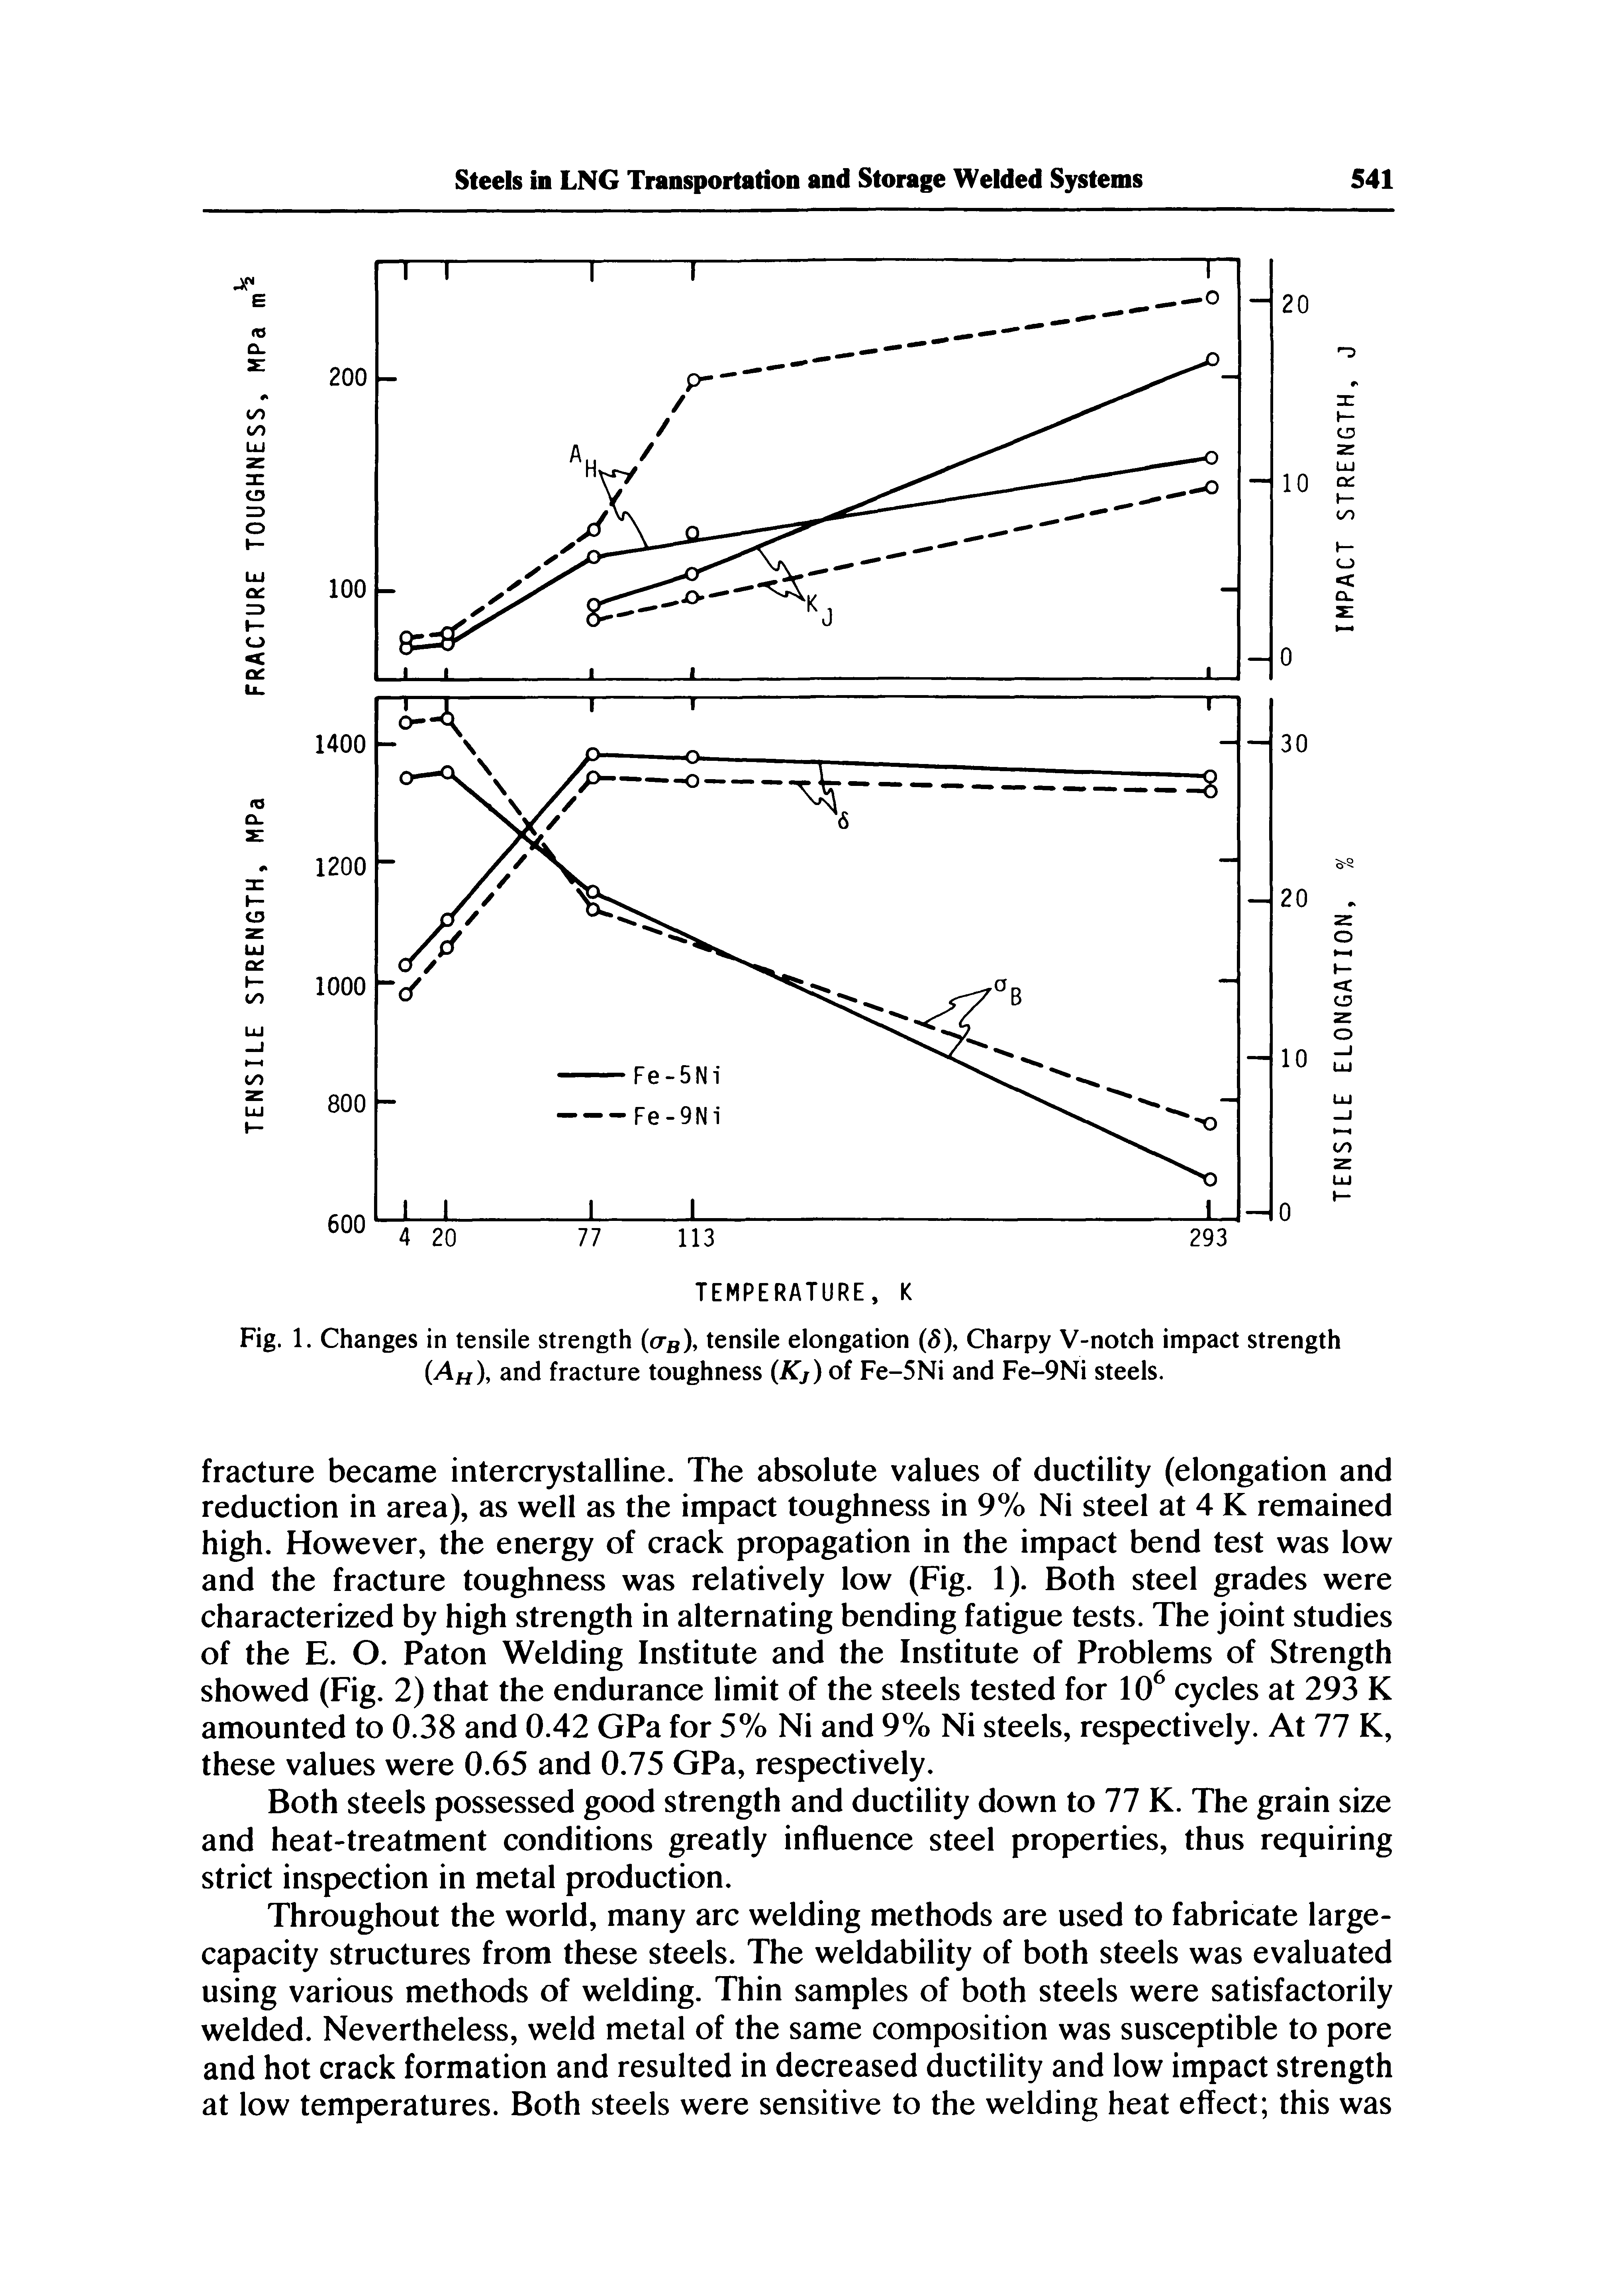 Fig. 1. Changes in tensile strength (<7 ), tensile elongation (5), Charpy V-notch impact strength (Ah), and fracture toughness (Kj) of Fe-5Ni and Fe-9Ni steels.